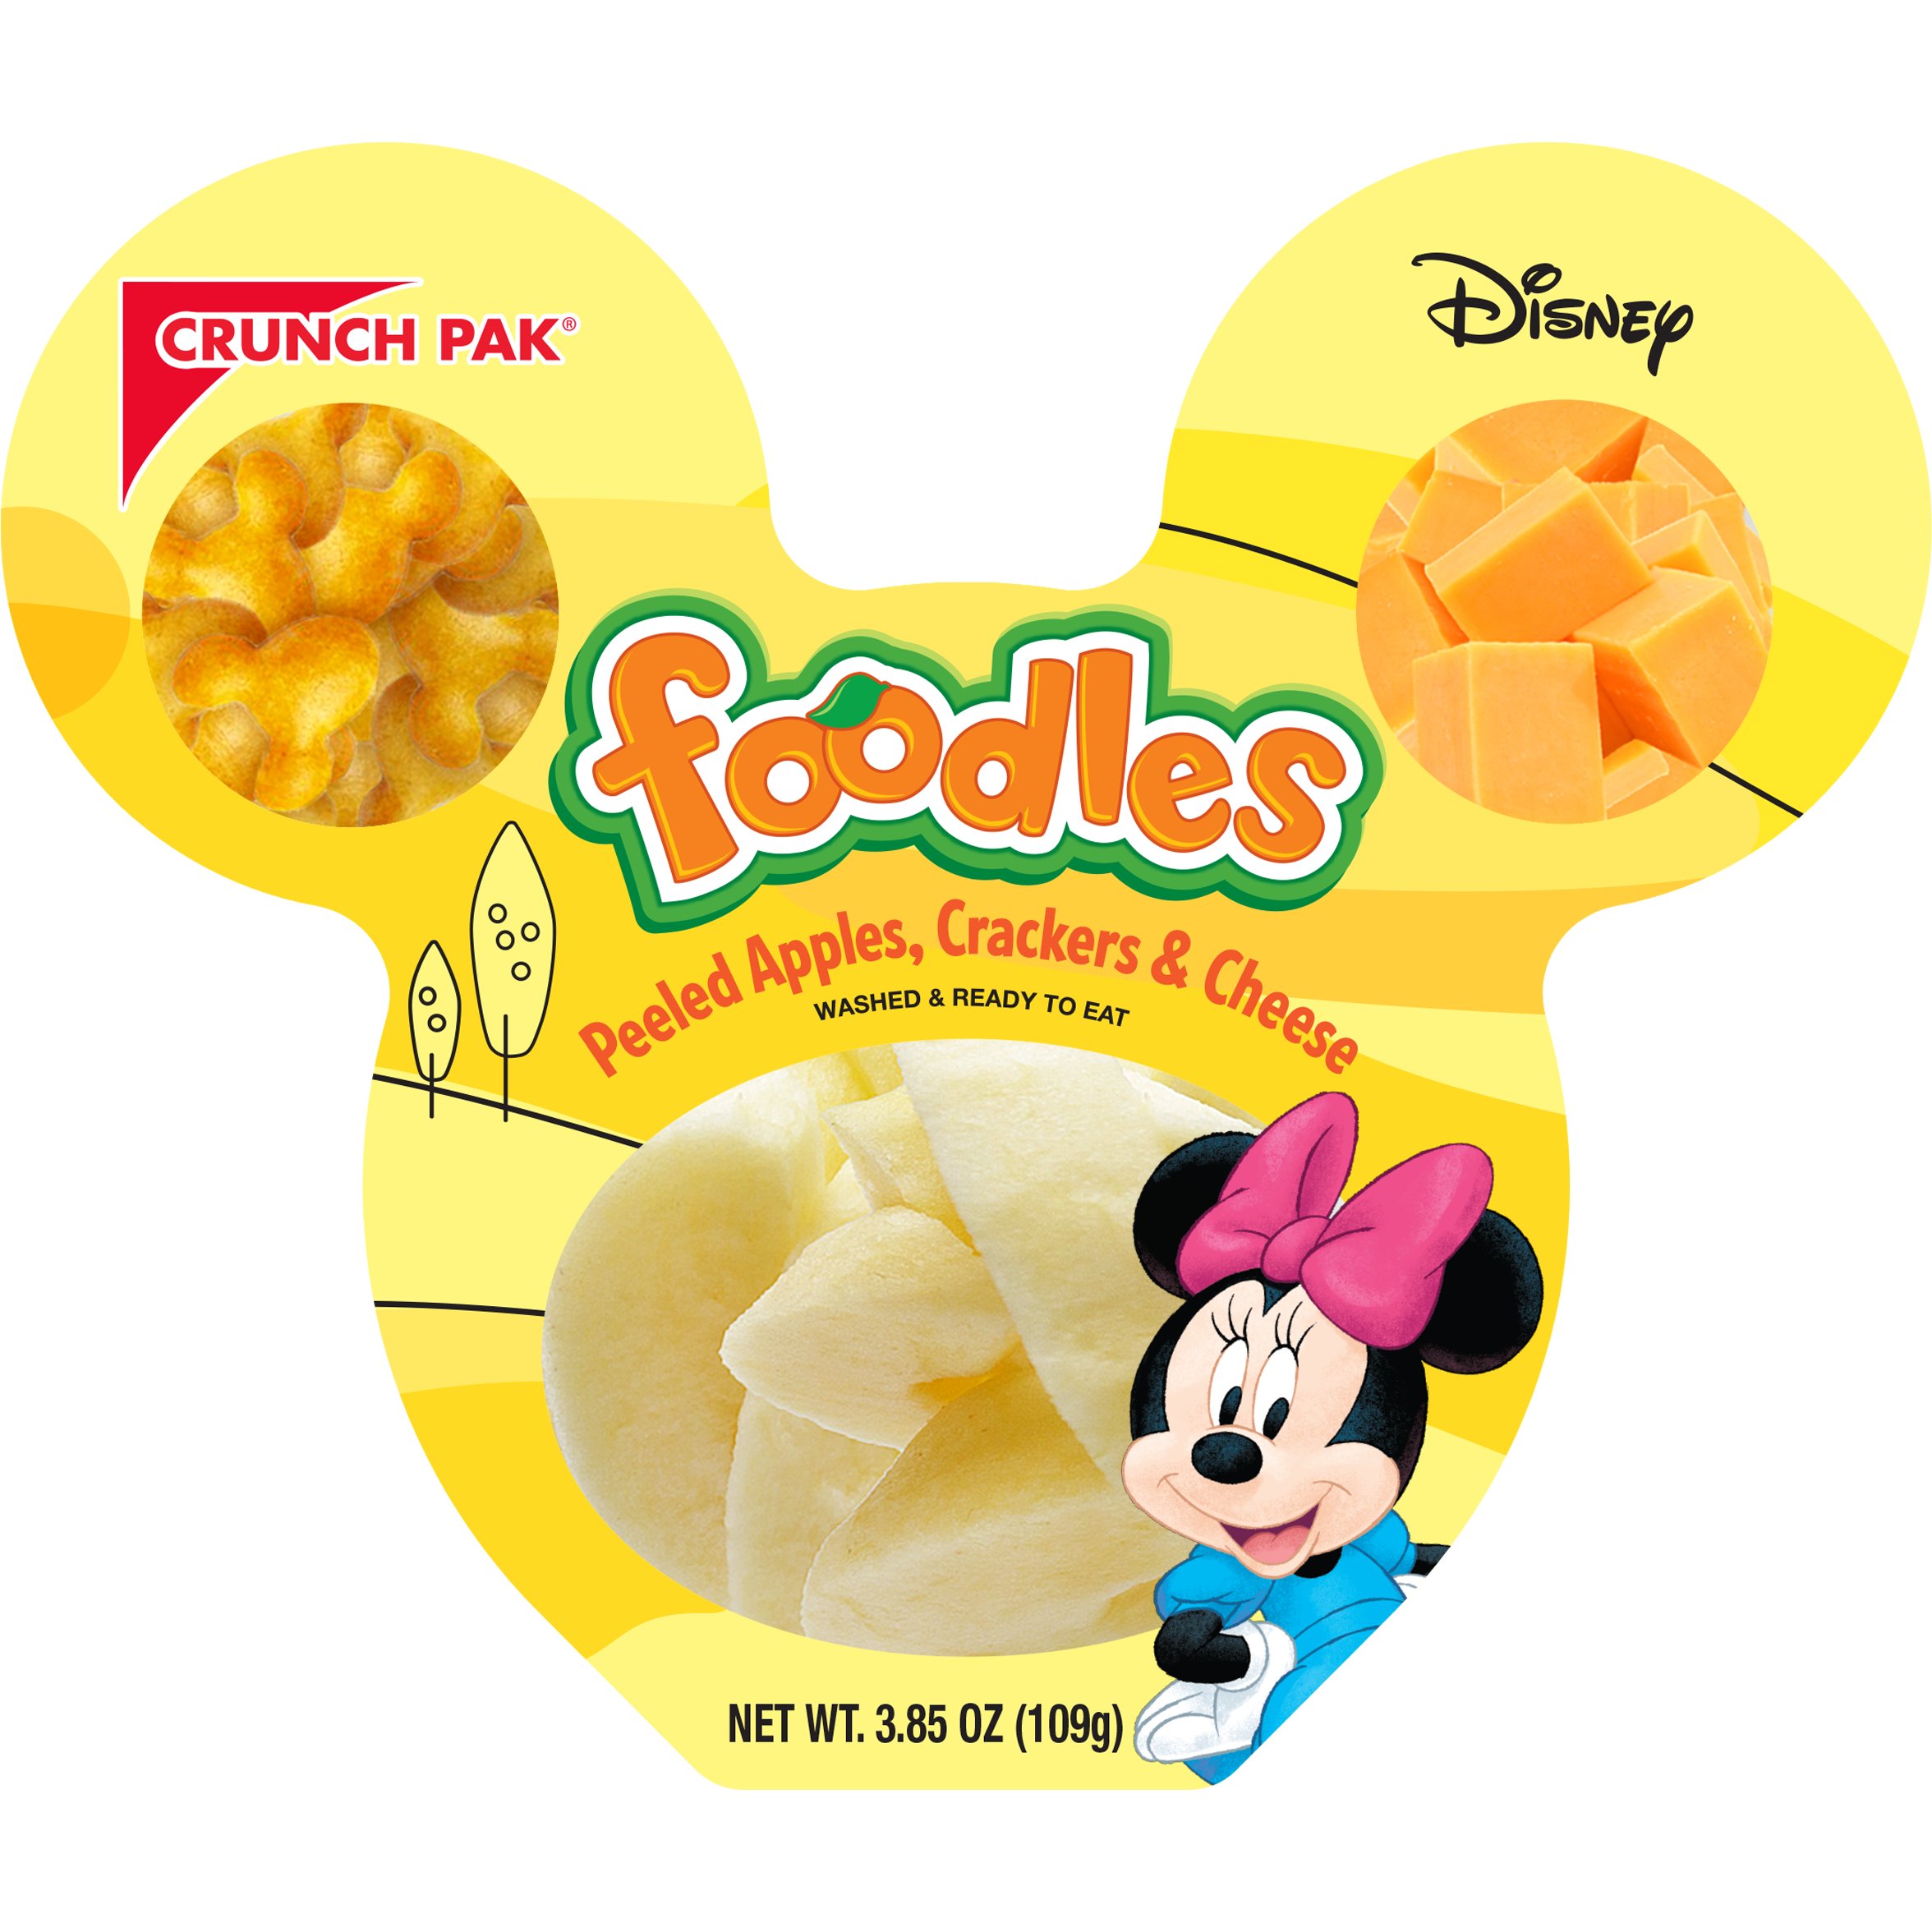 transmissie Correspondentie maniac Crunch Pak Disney Foodles Snack Pack - Apples, Crackers & Cheese - Shop  Snack Trays at H-E-B